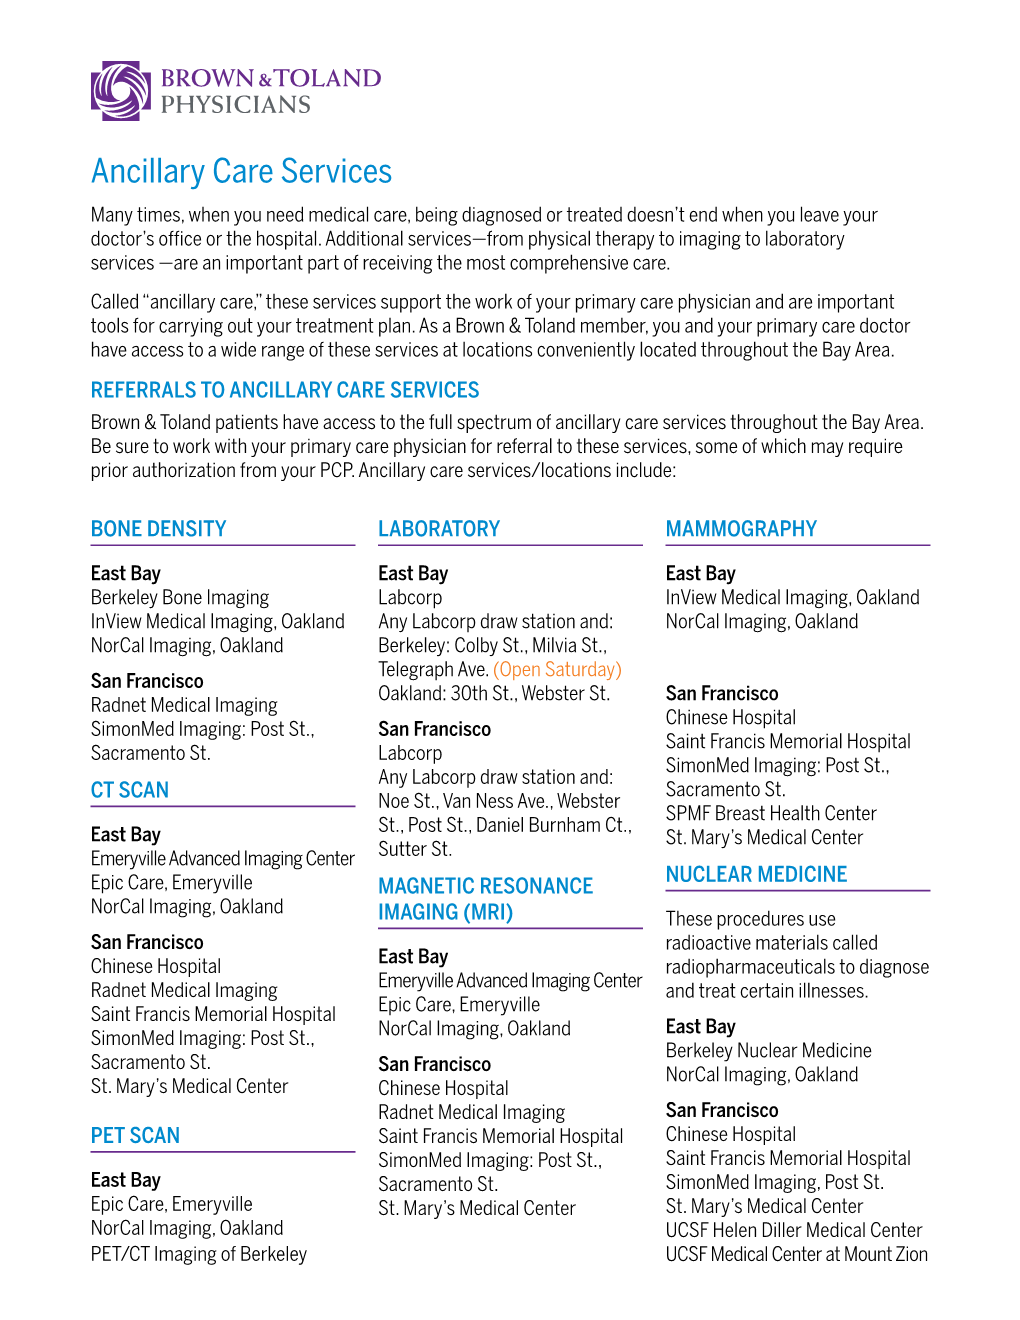 Ancillary Care Services Many Times, When You Need Medical Care, Being Diagnosed Or Treated Doesn’T End When You Leave Your Doctor’S Office Or the Hospital